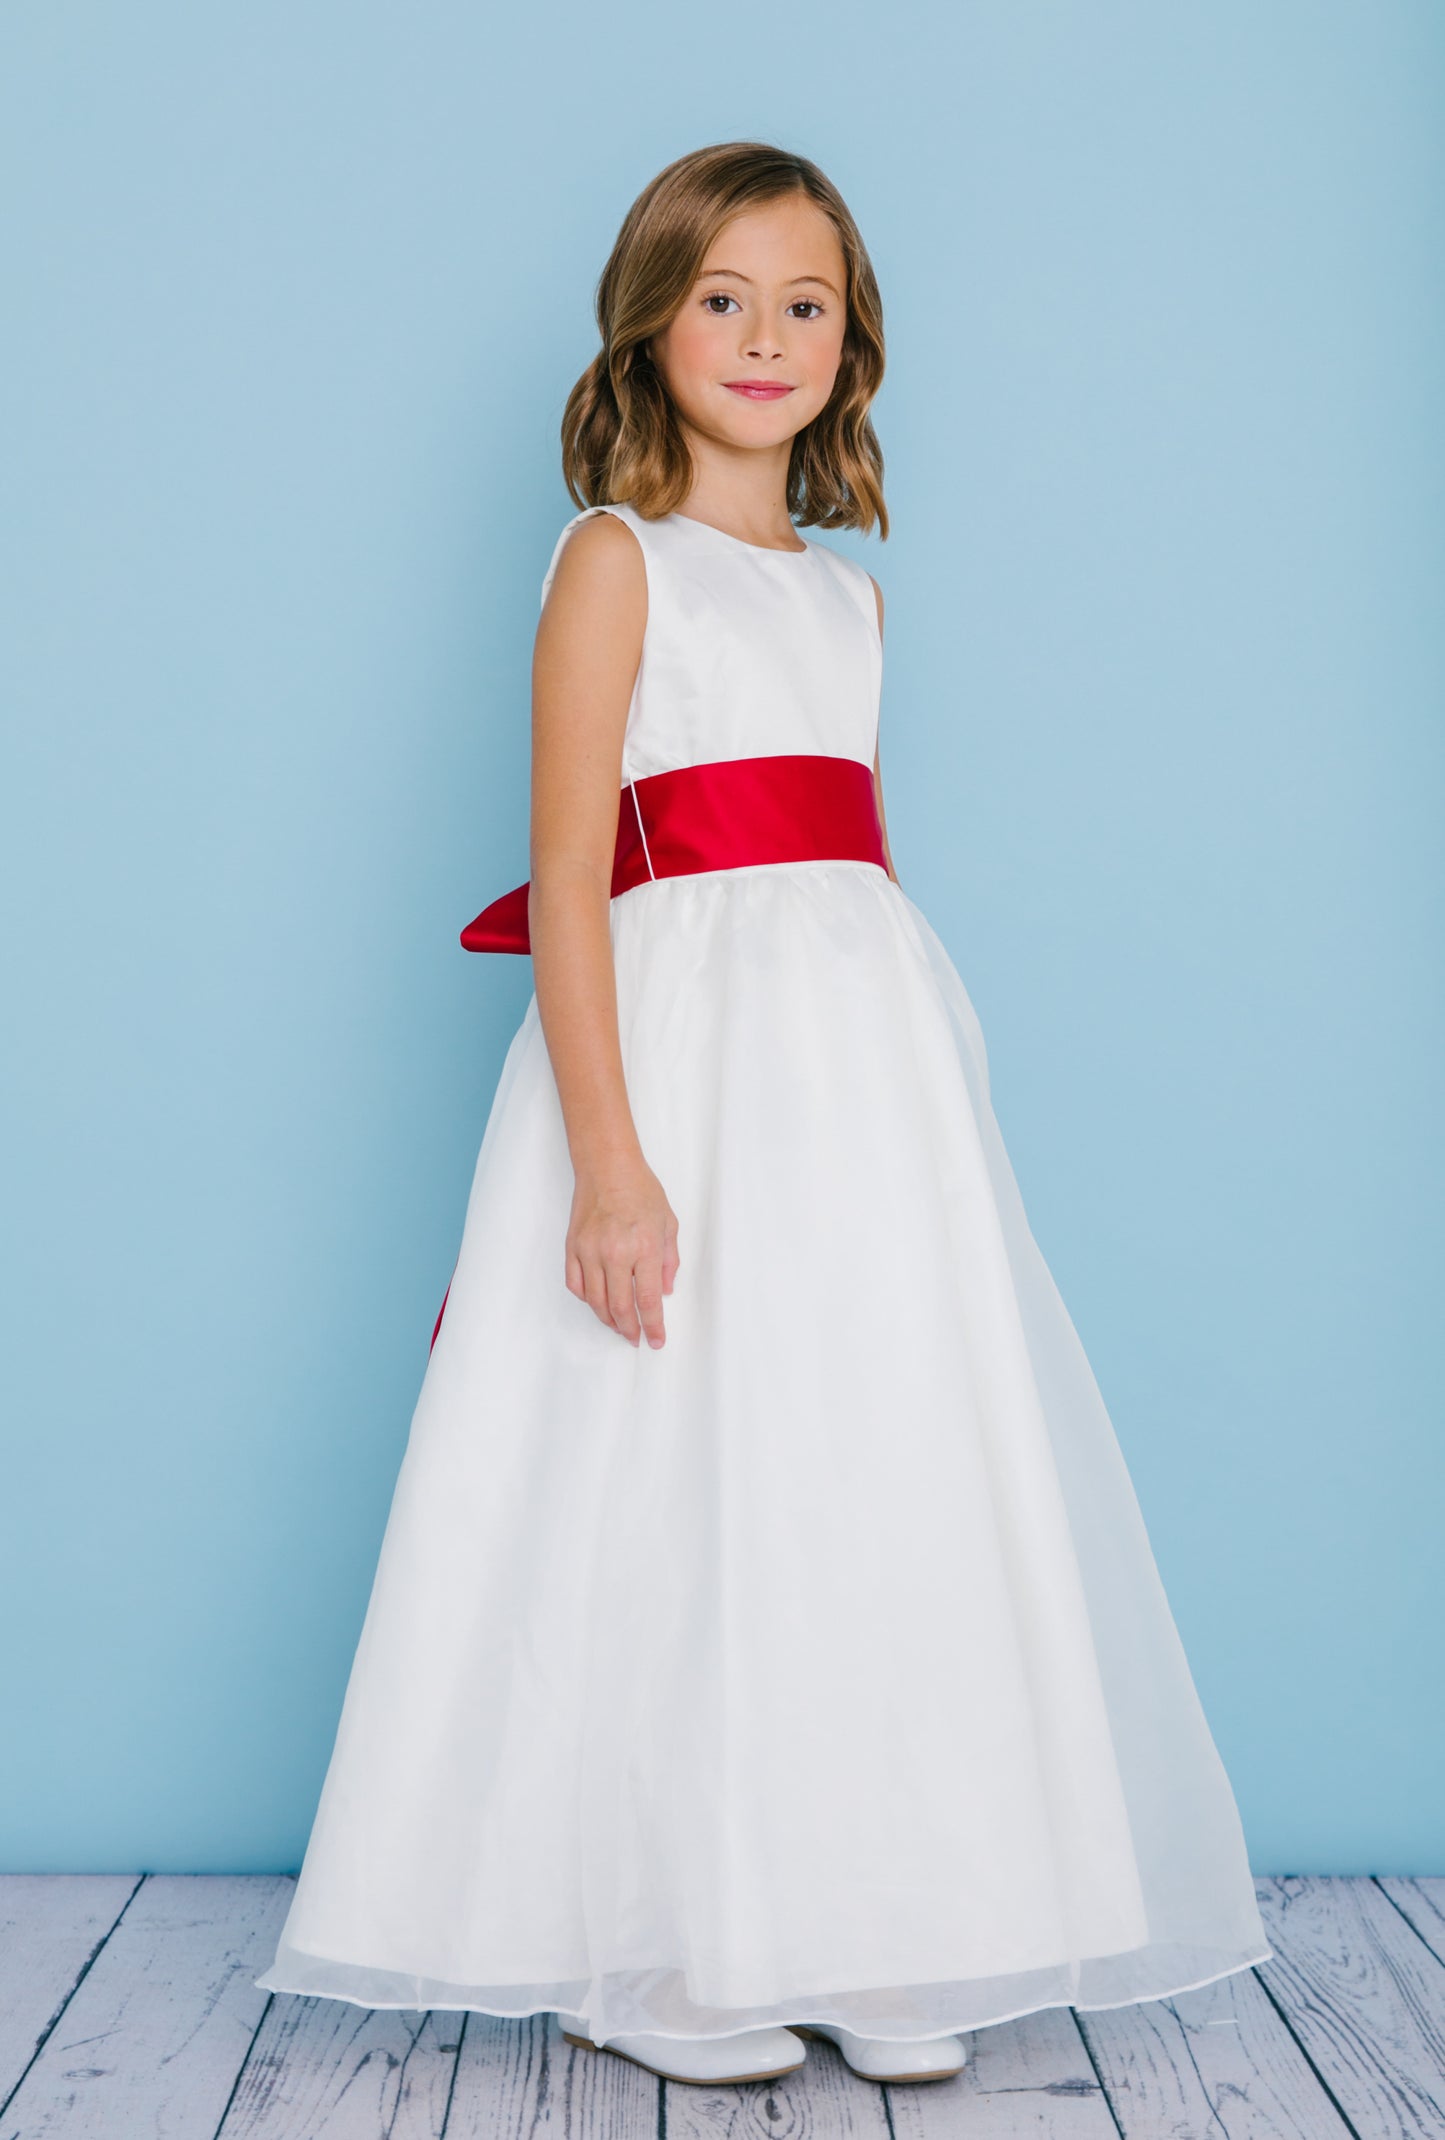 Rosebud Fashions Style 5101 is a sleeveless full length dress with a scoop neckline. Natural waist is accented with a satin sash with self-tying streamers. Satin buttons cover the zipper.  Long High Neck Flower Girl Dress Sash Buttons First Communion.  Available Sizes: 2, 4, 6, 8, 10, 12, 14, 16  Available Colors: White, Ivory